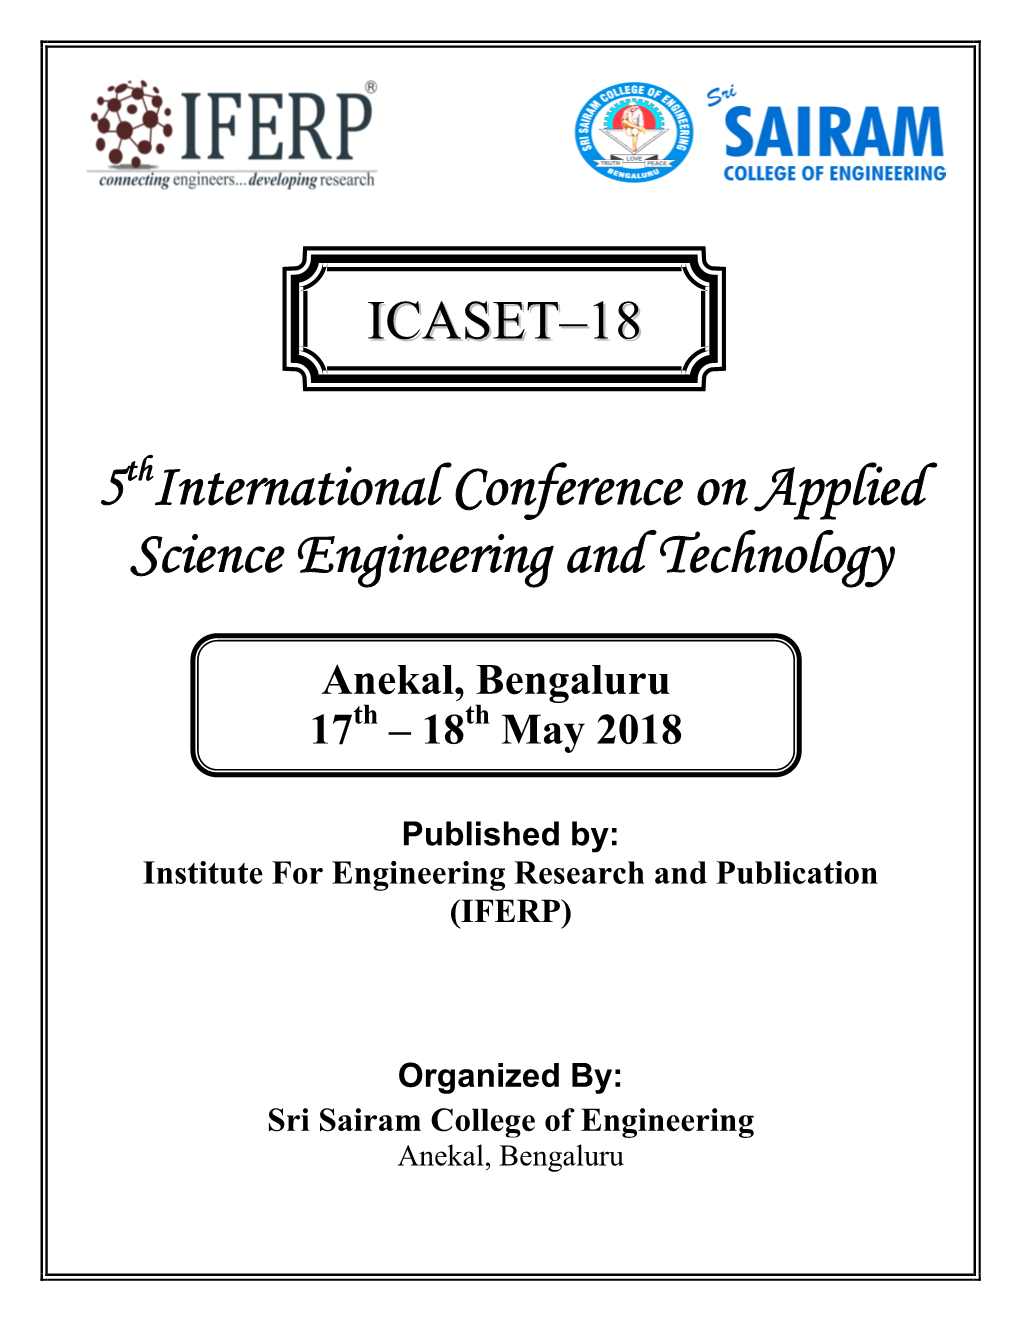 International Conference on Applied Science Engineering and Technology